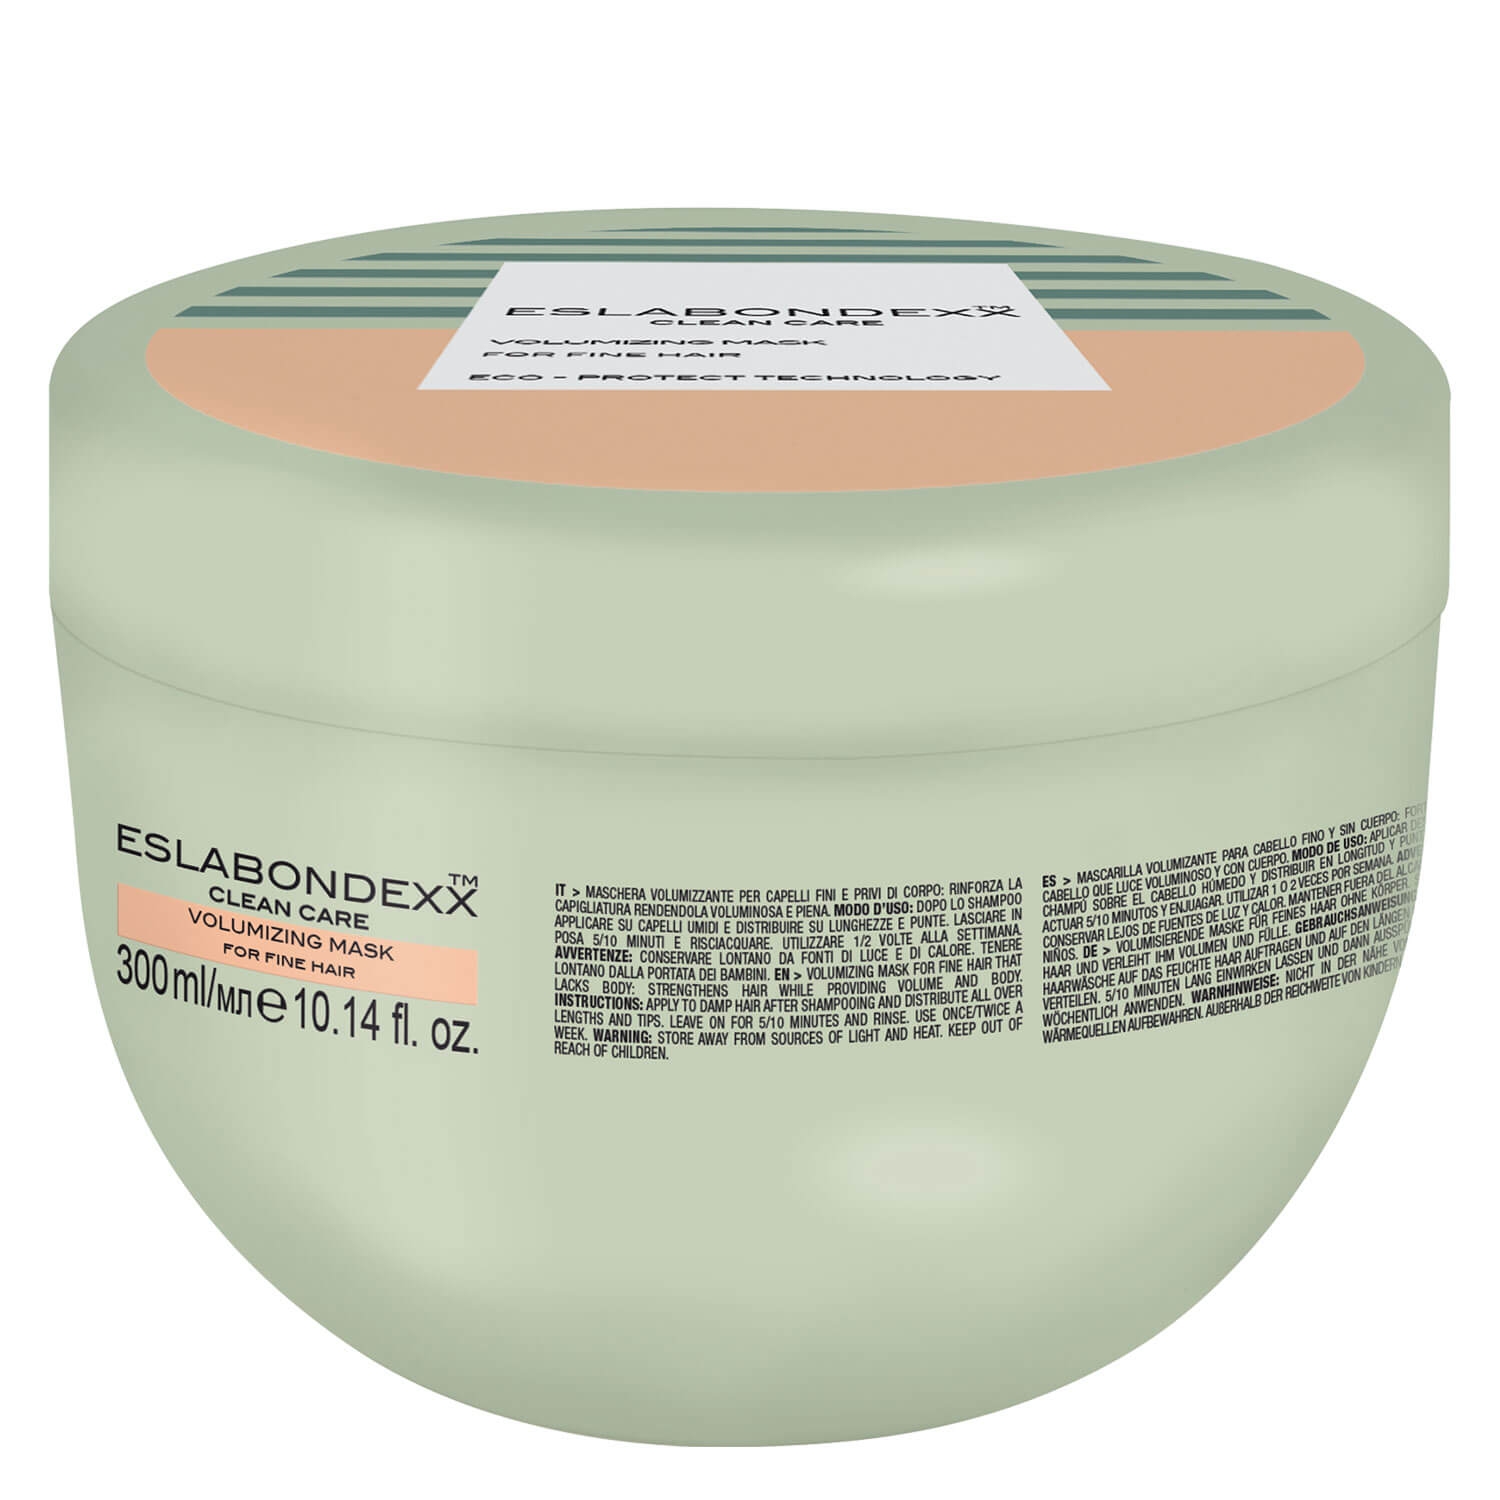 Product image from Eslabondexx Clean Care - Volumizing Mask